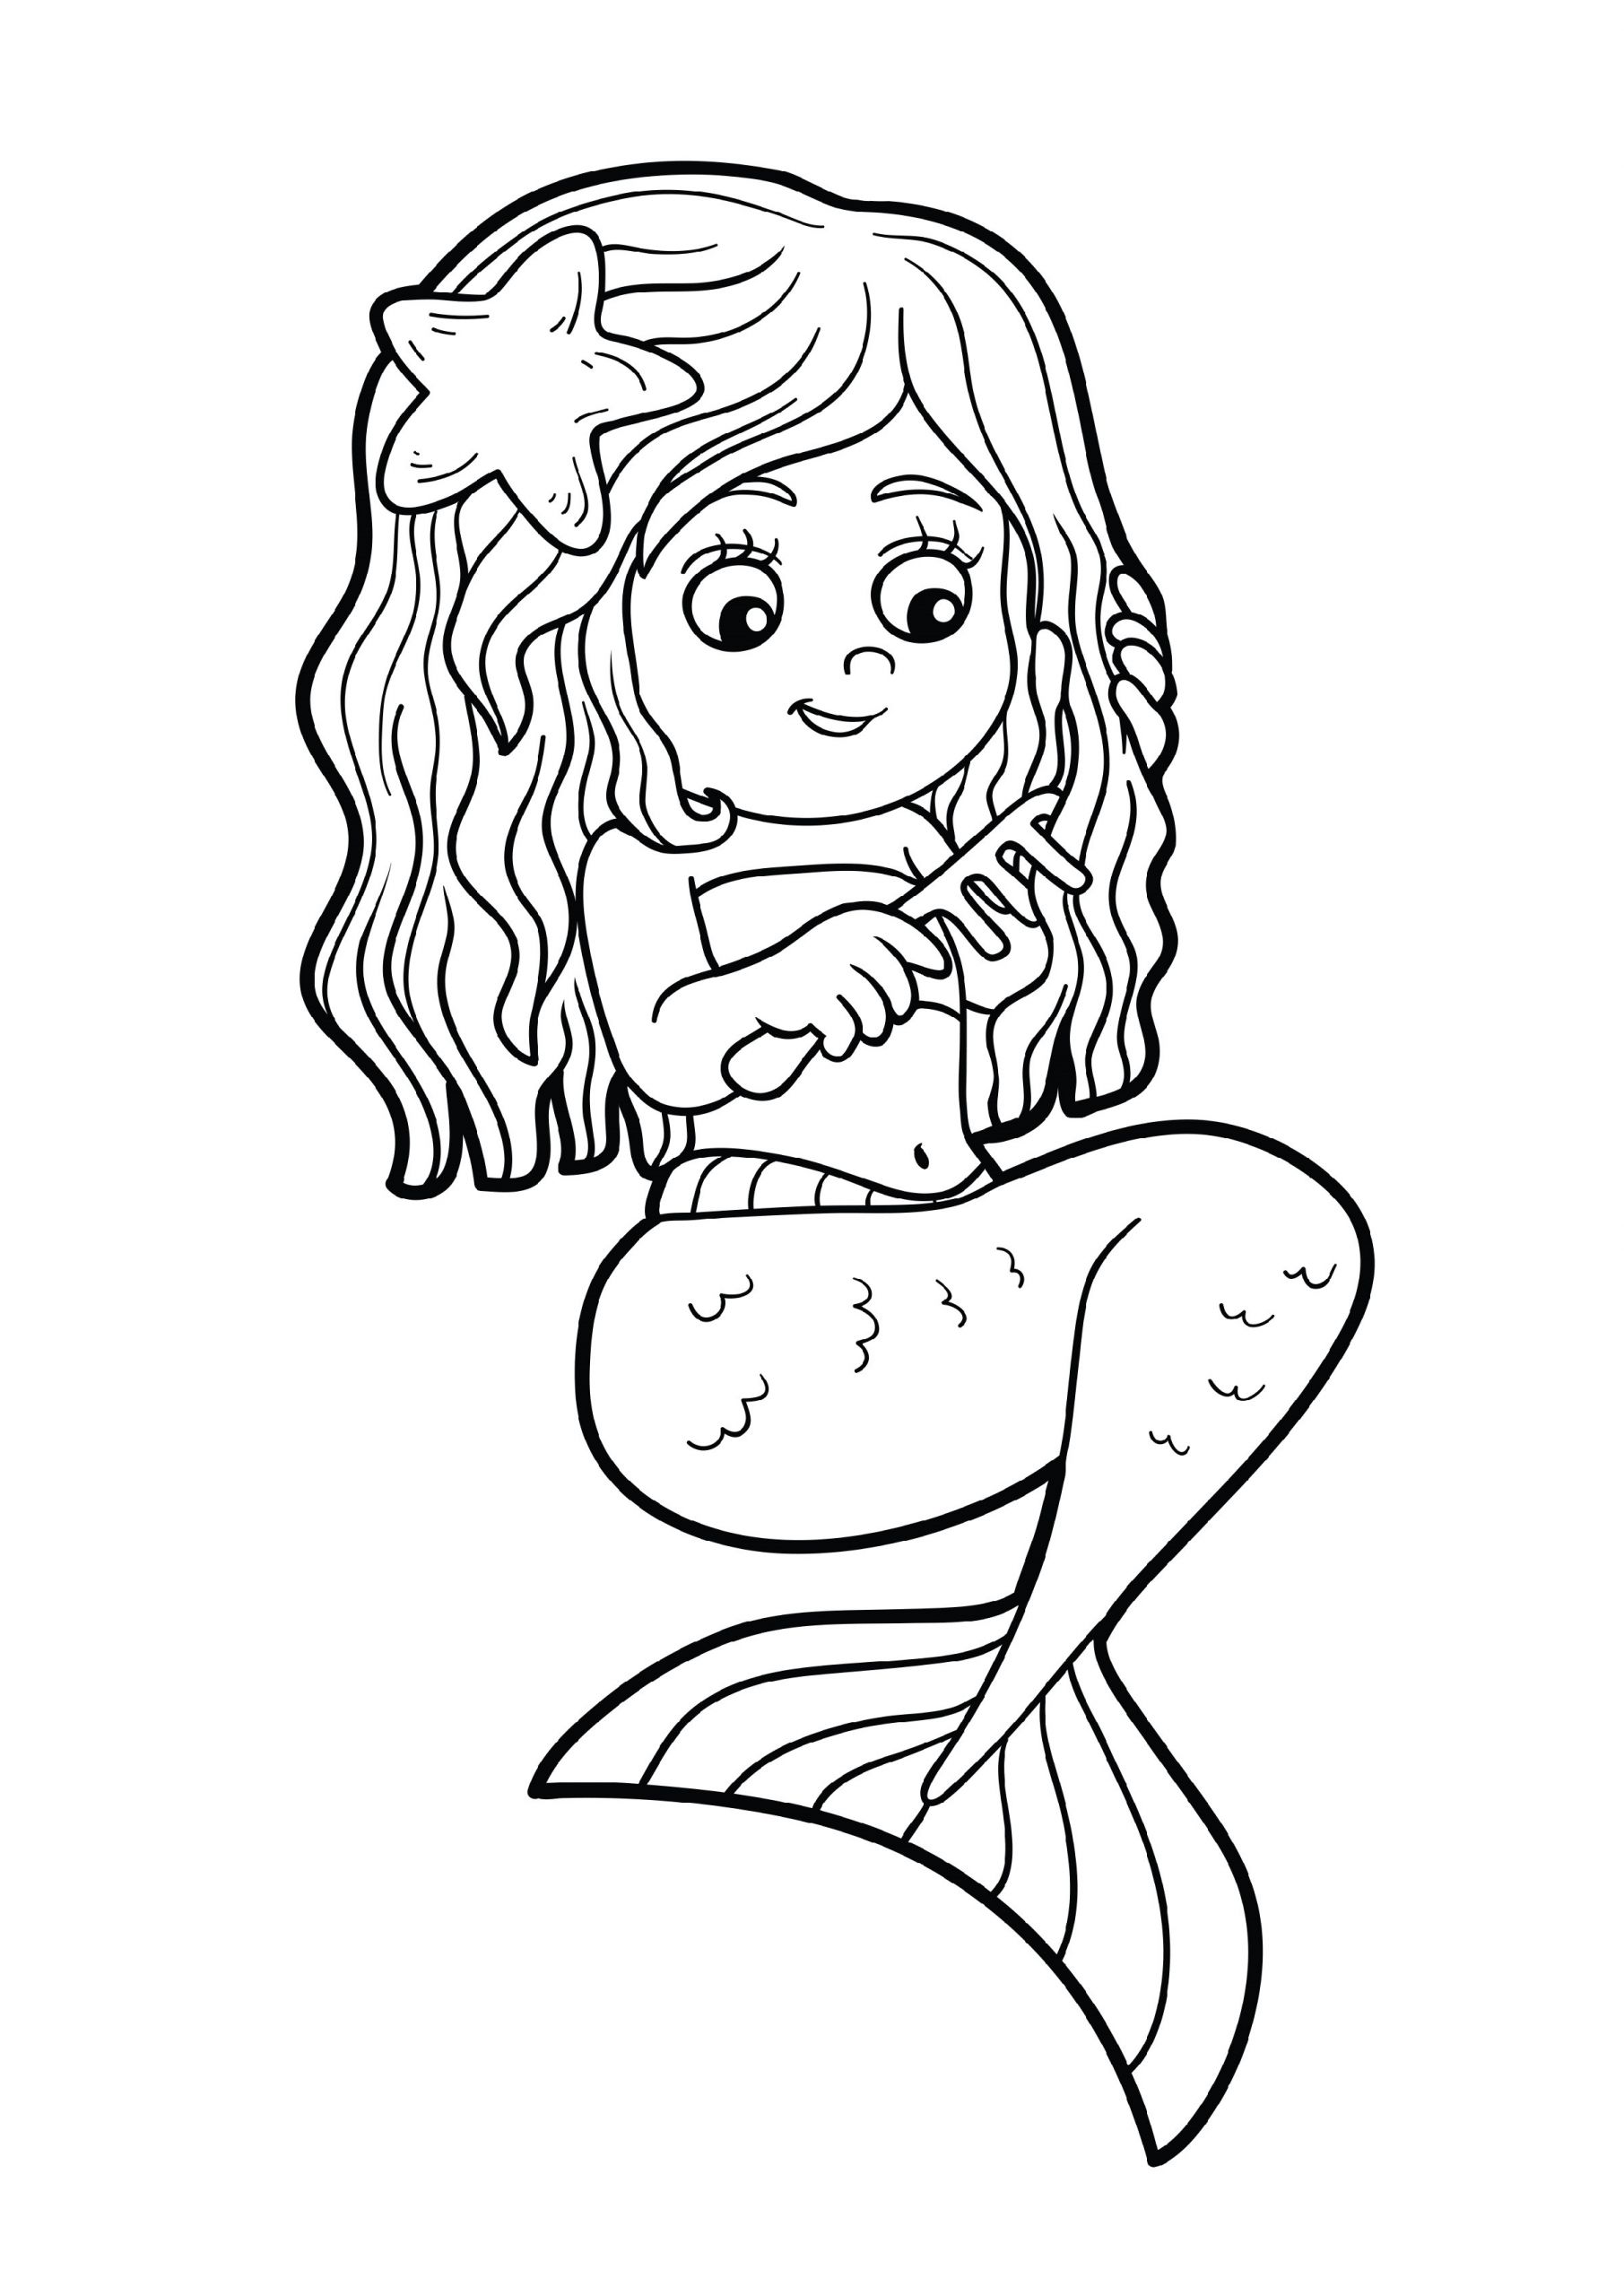 Kids Coloring Pages Mermaid
 Pretty Mermaid Coloring Pages for Girls